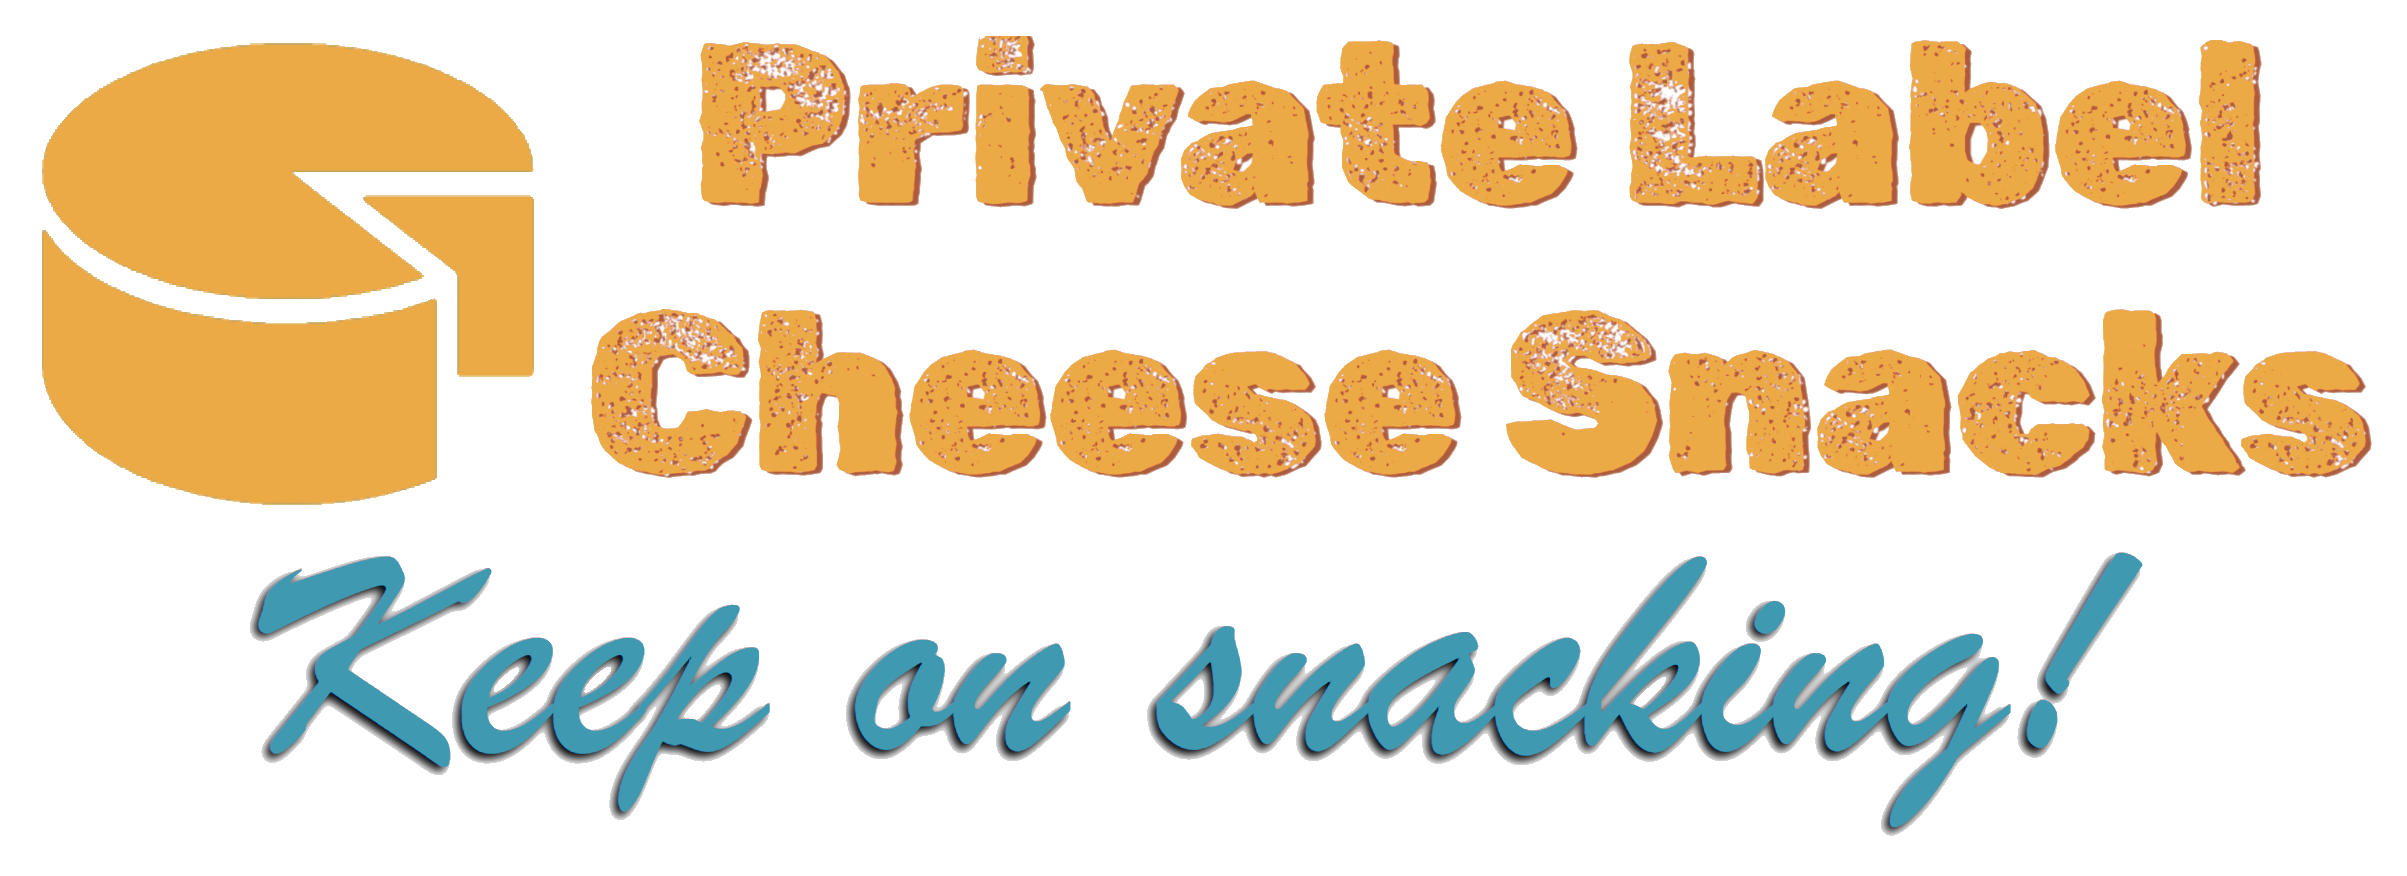 Private Label Cheese Snacks Website Logo